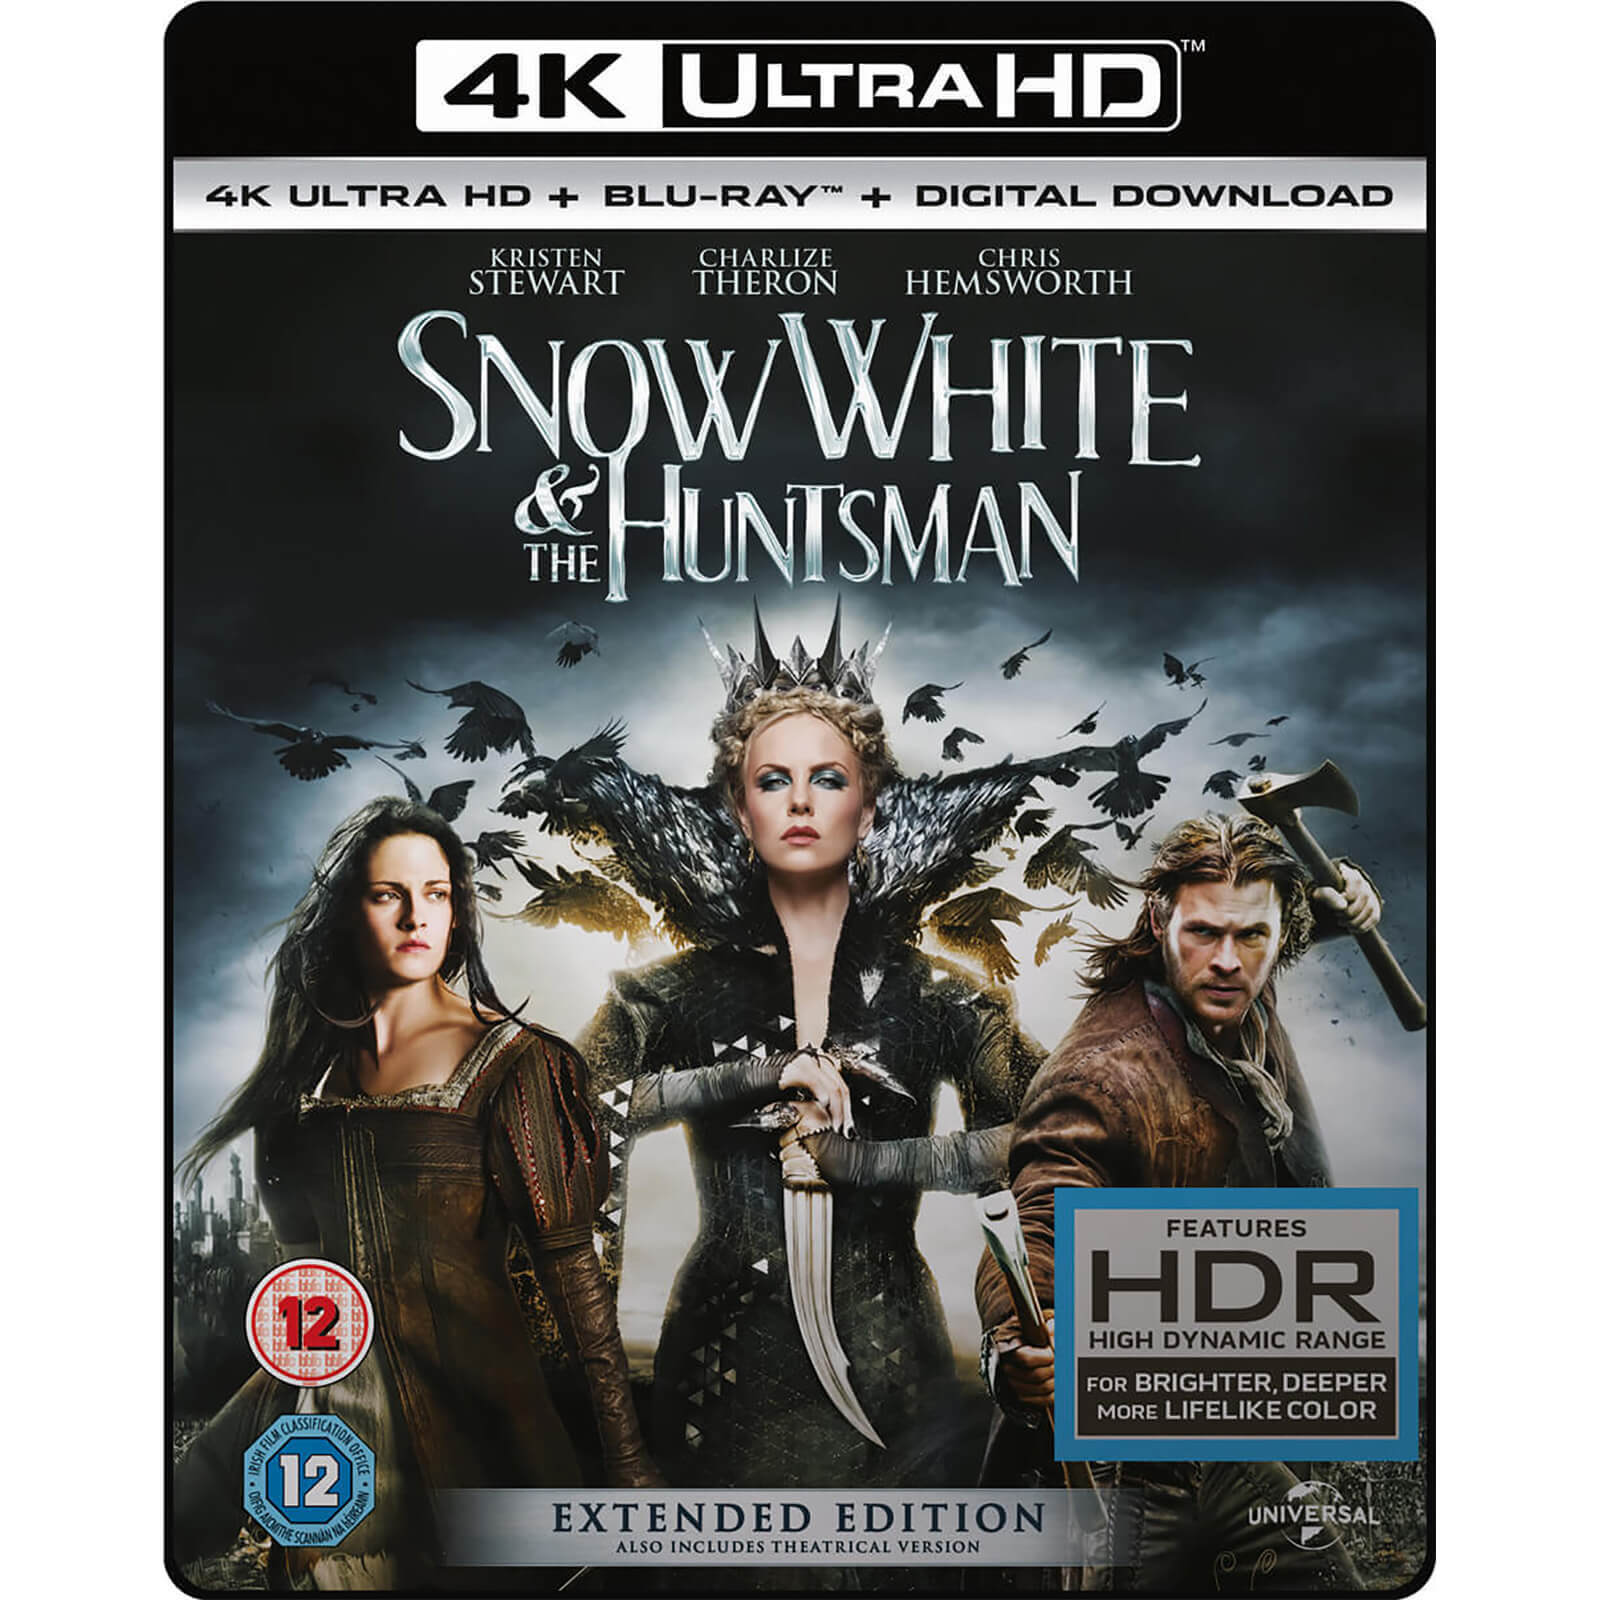 Universal Pictures Snow white and the huntsman (extended edition) - 4k ultra hd